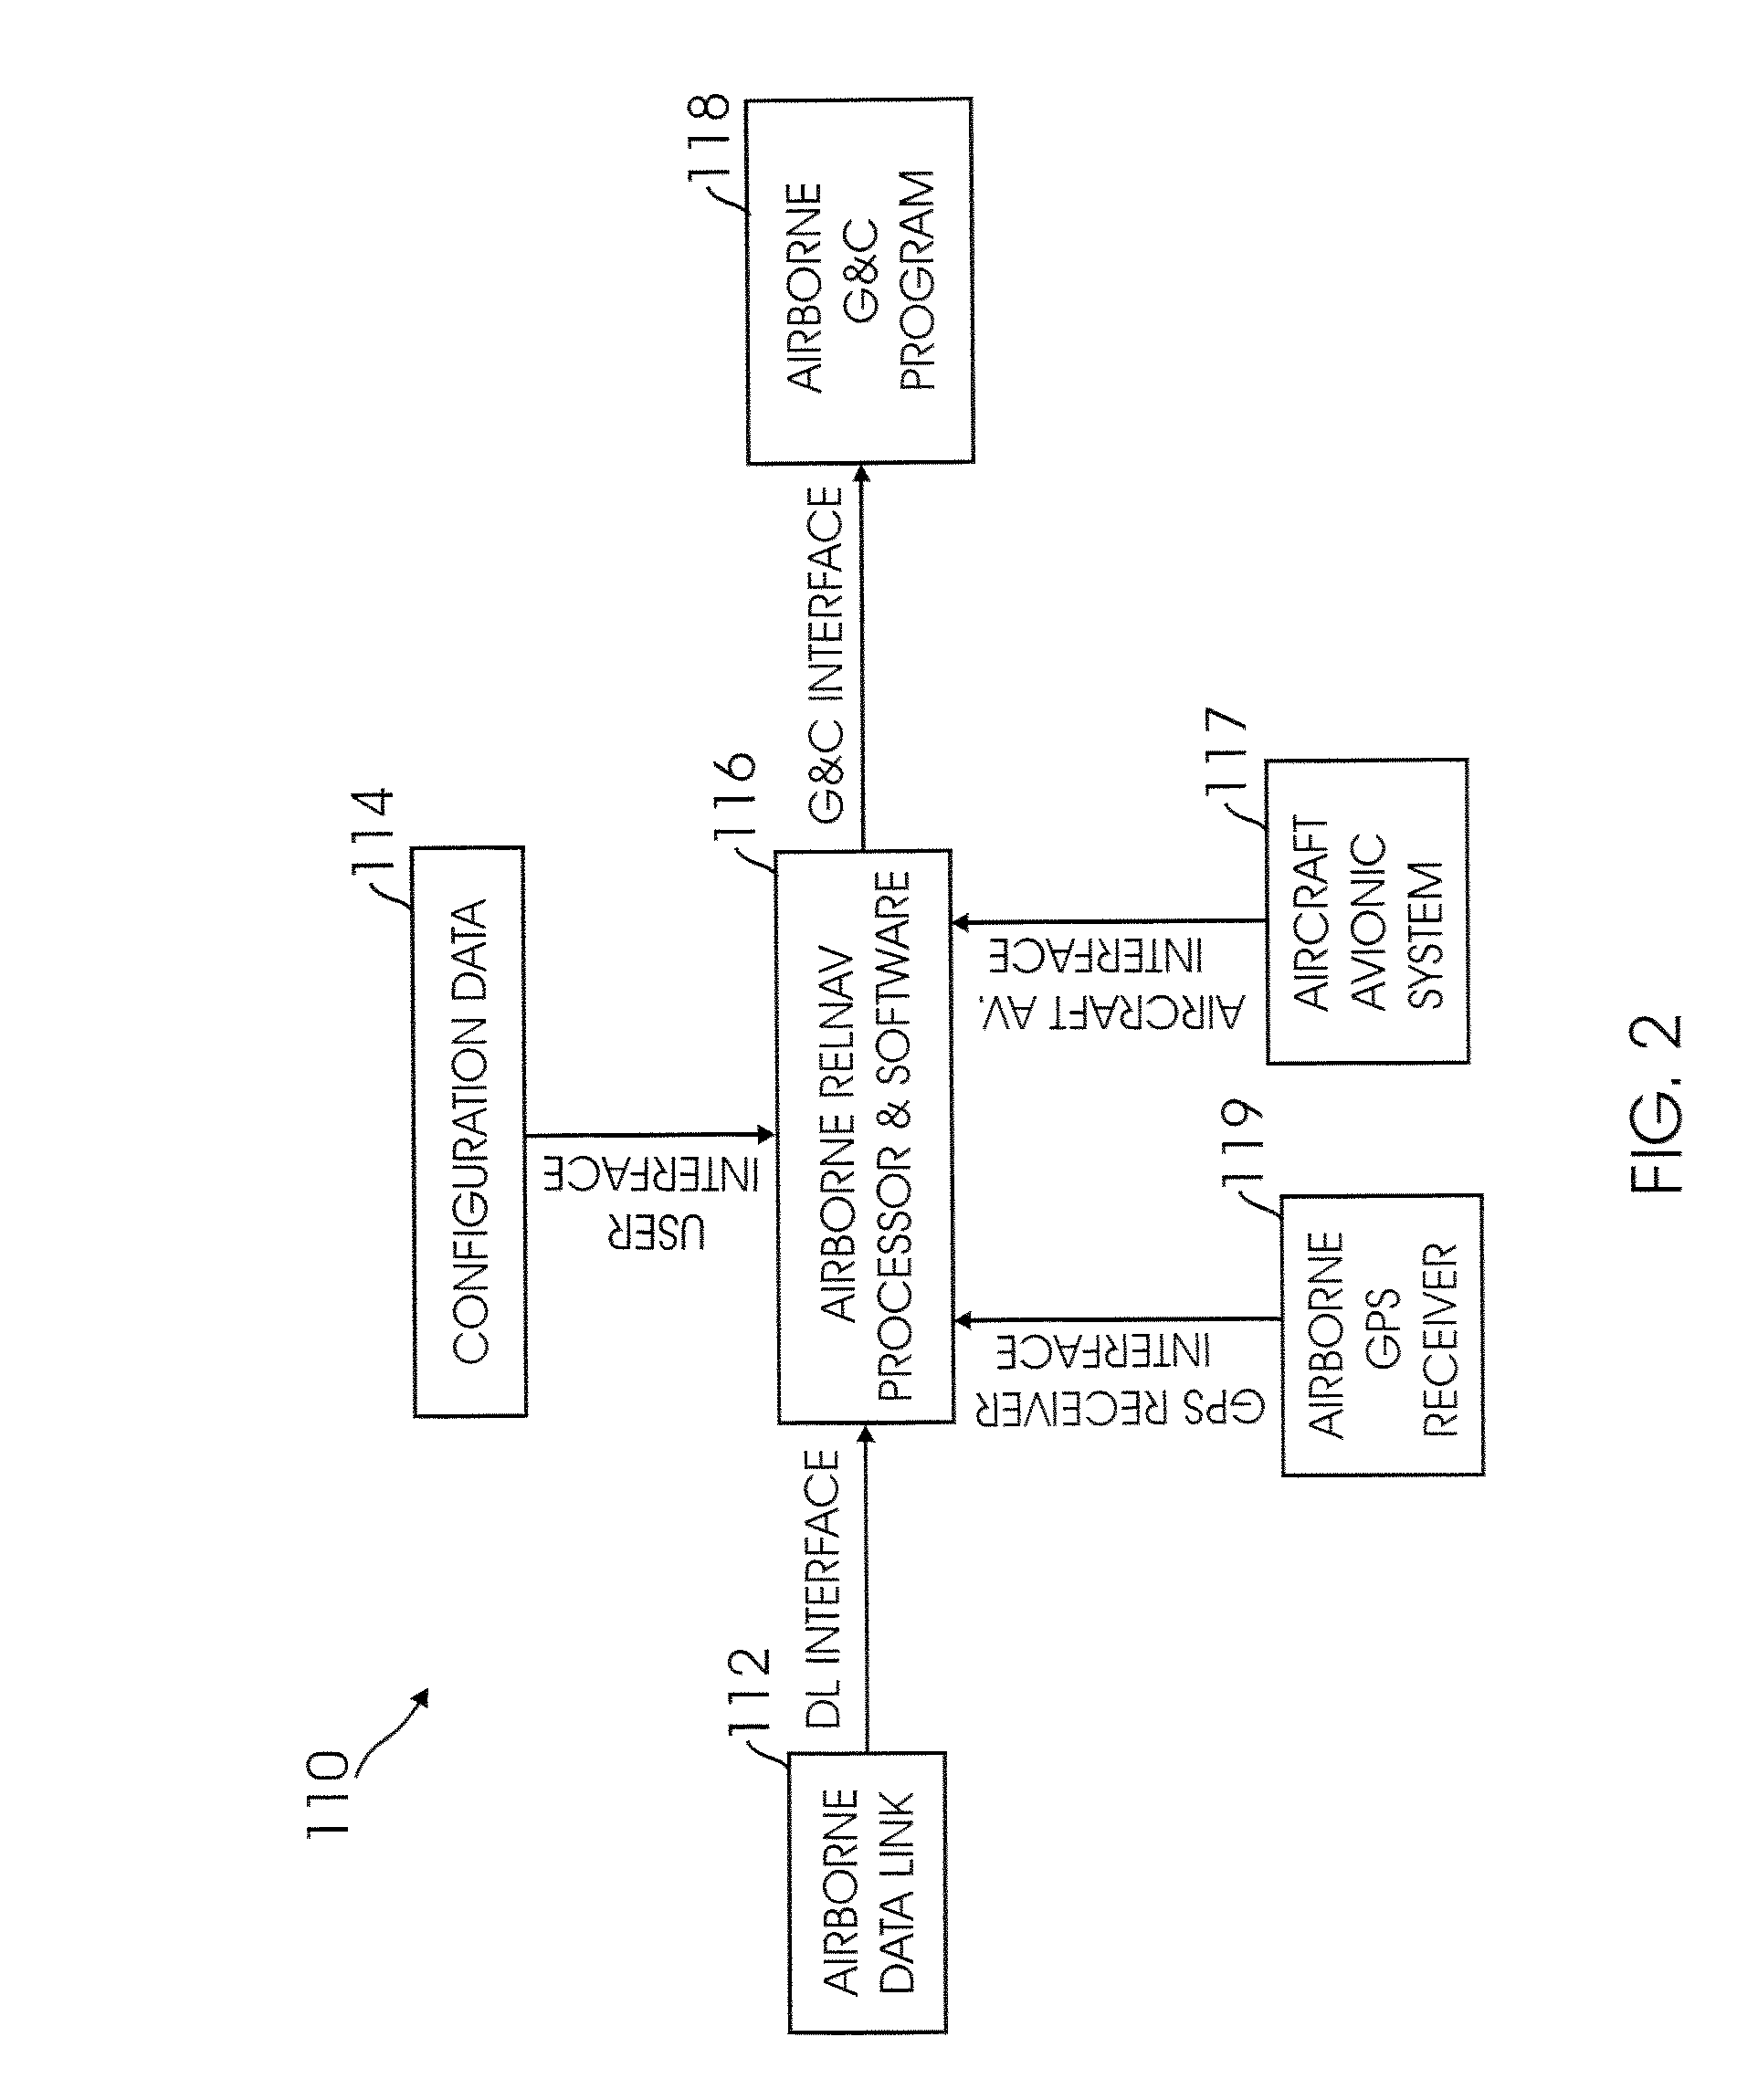 Method for fusing multiple GPS measurement types into a weighted least squares solution